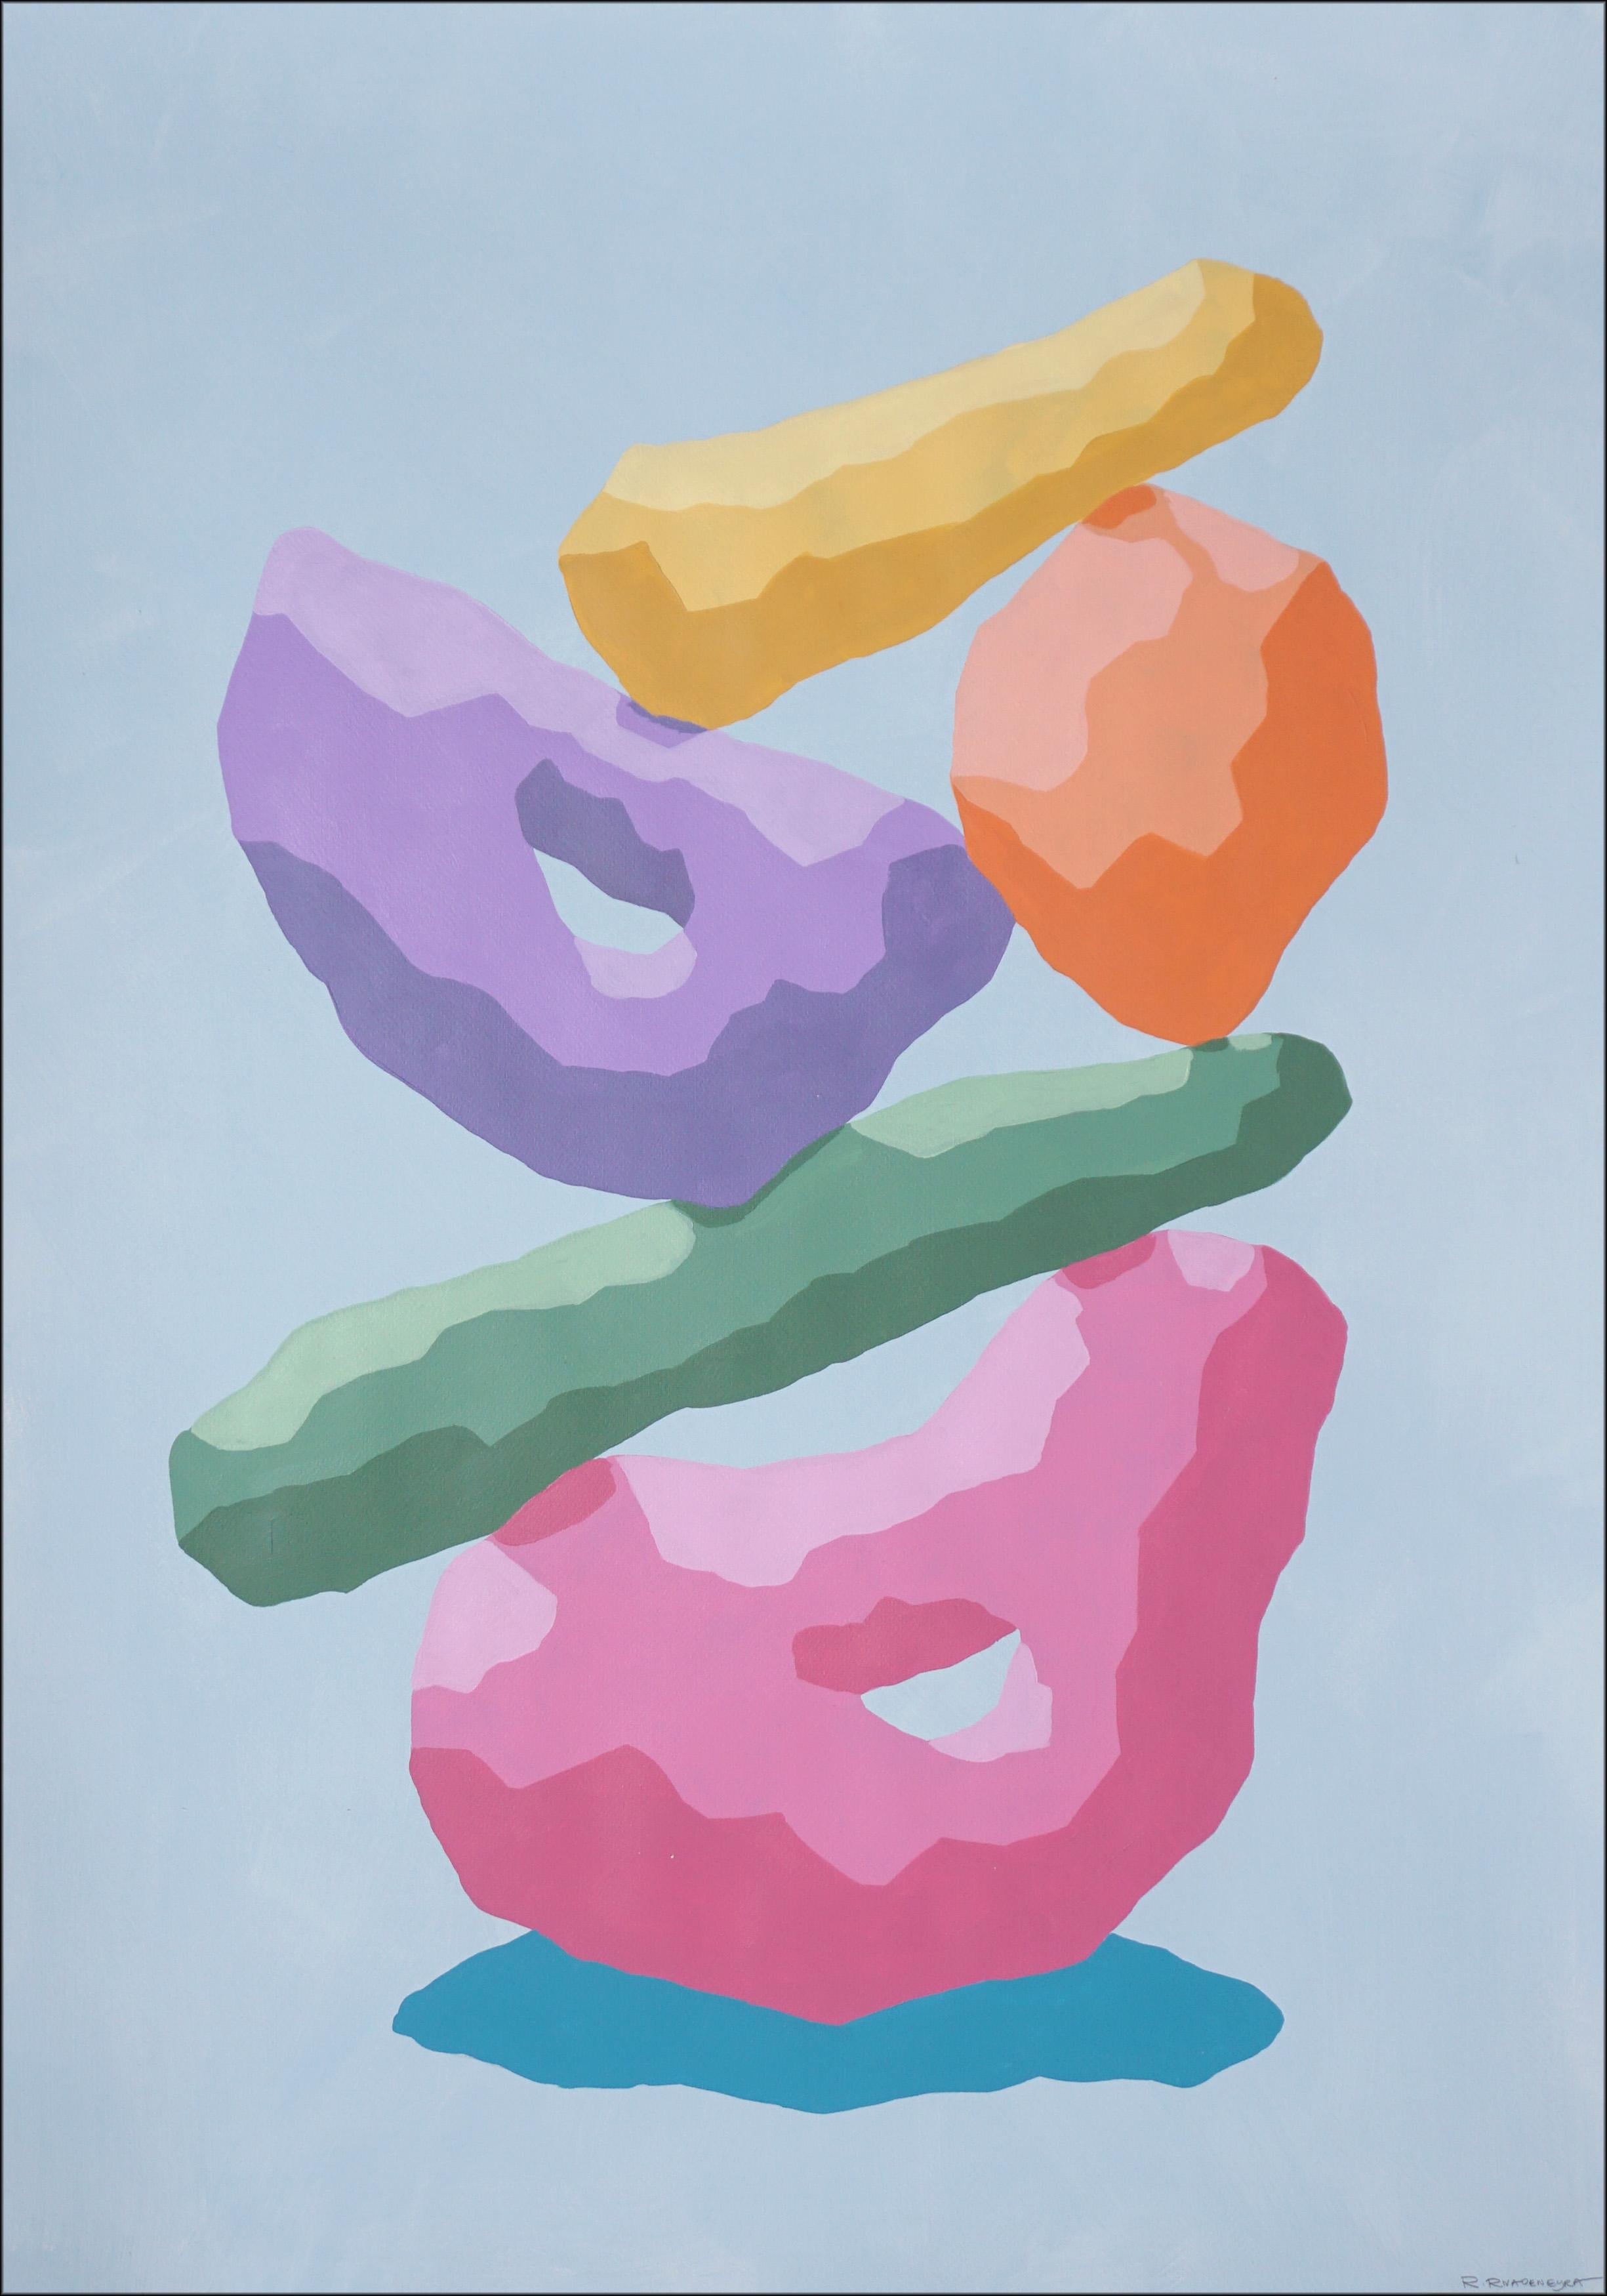 Ryan Rivadeneyra Abstract Painting - Rainbow Totem, Pastel Tones 3D Render Style Sculpture, Pink, Blue, Yellow Shapes